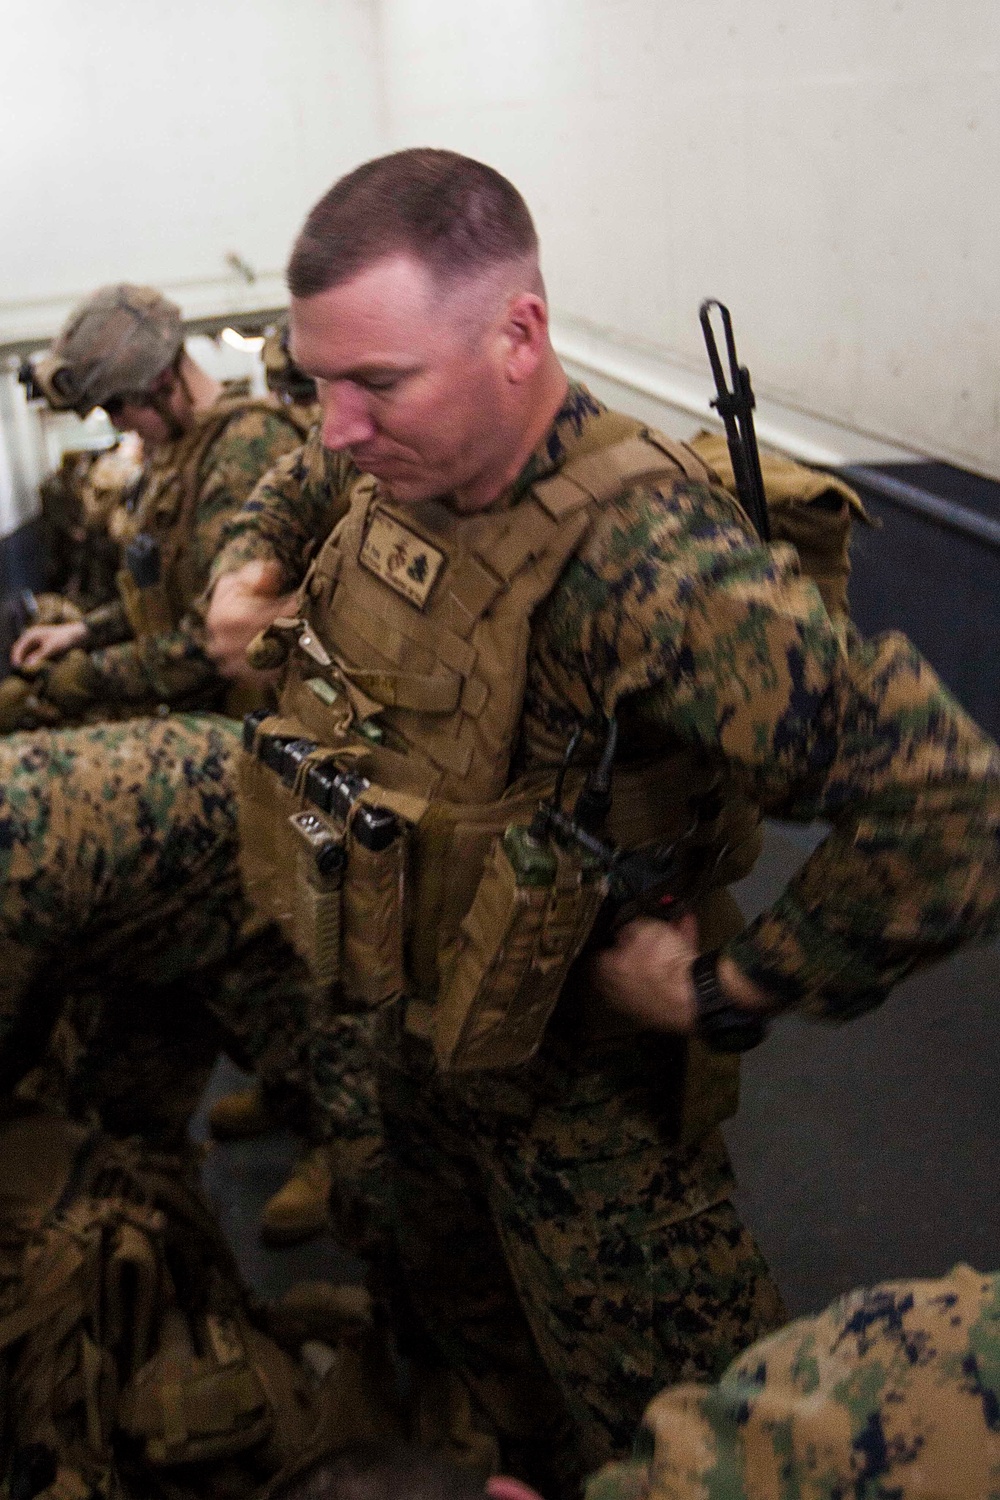 22nd MEU Marines depart for training with NATO allies in Greece